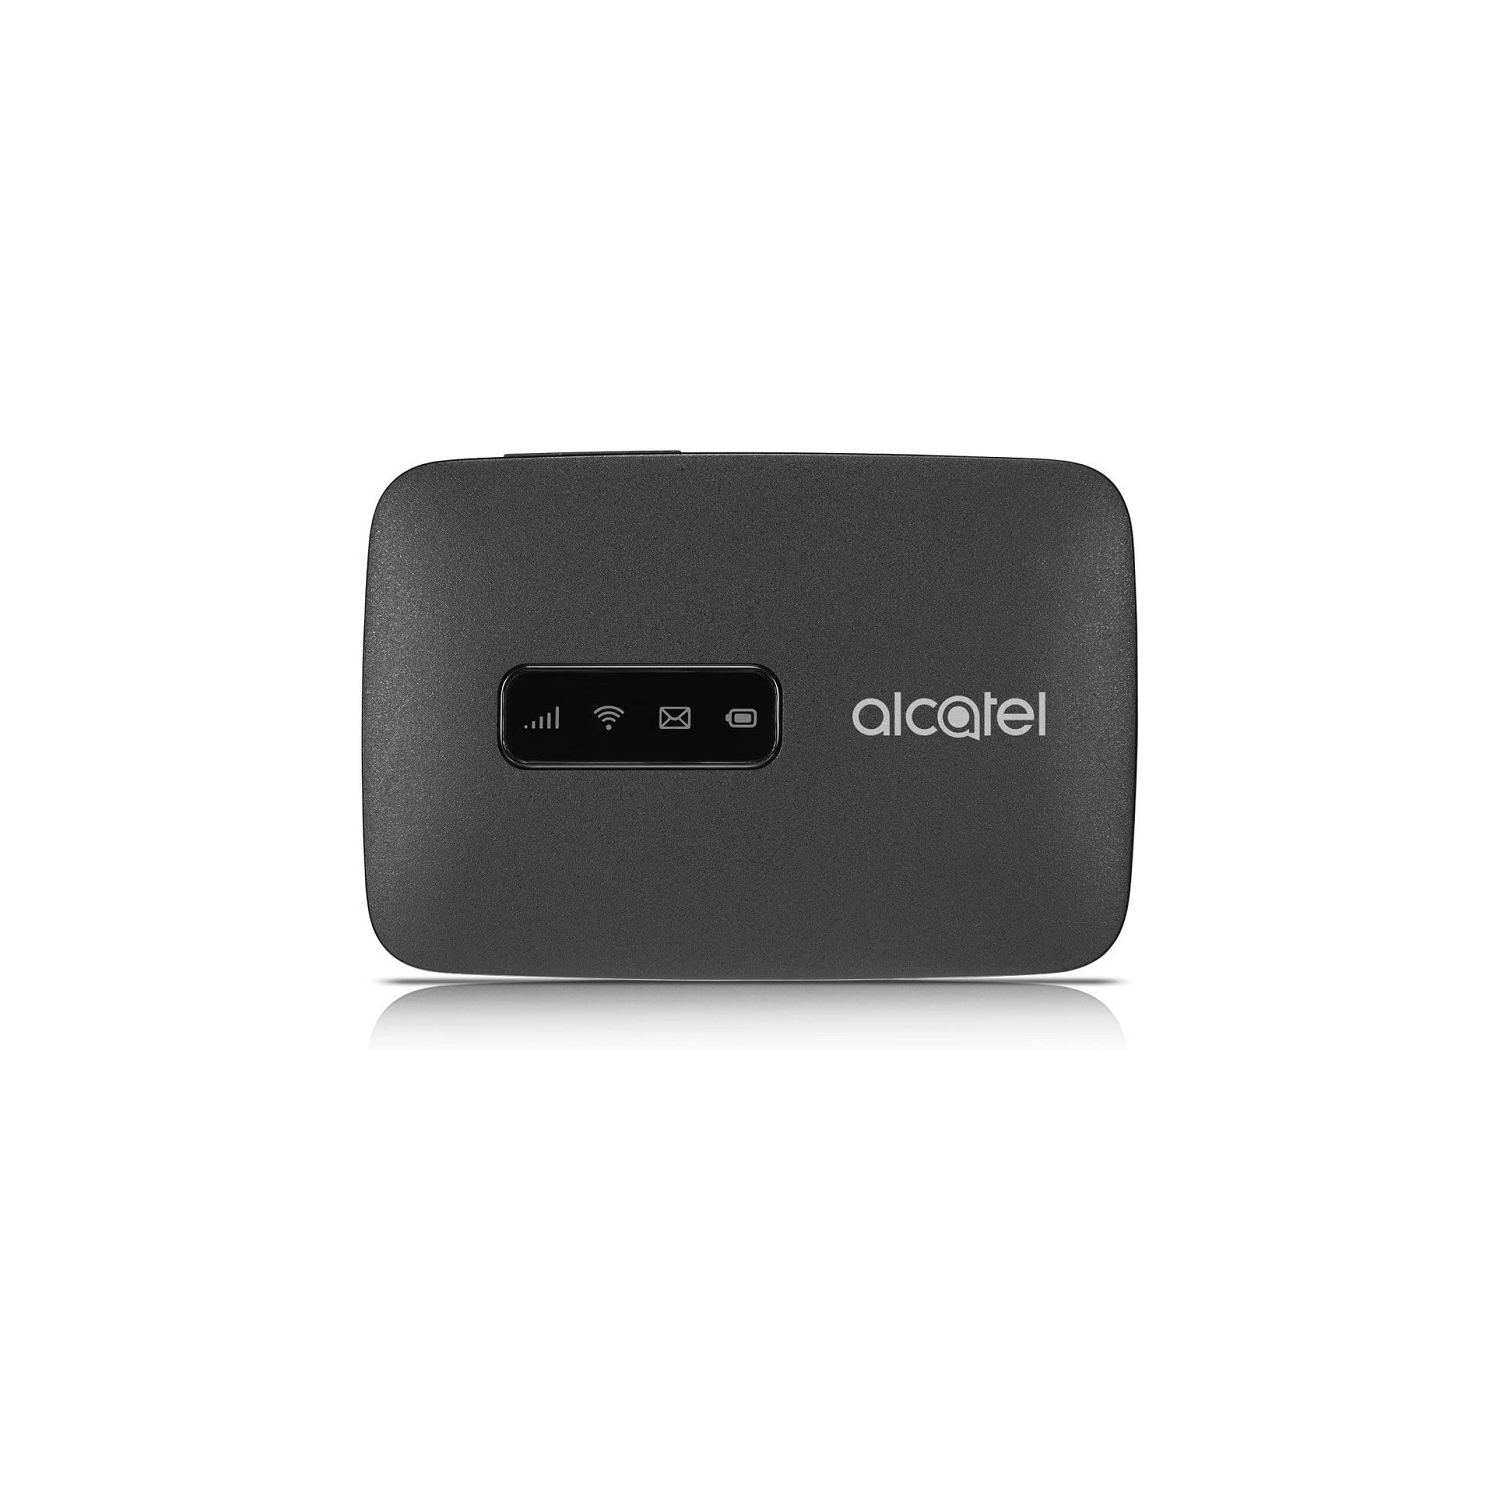 Refurbished (Good) - Alcatel LINKZONE US 4G LTE Wi-Fi Hotspot w/iOS & Android App GSM T-Mobile